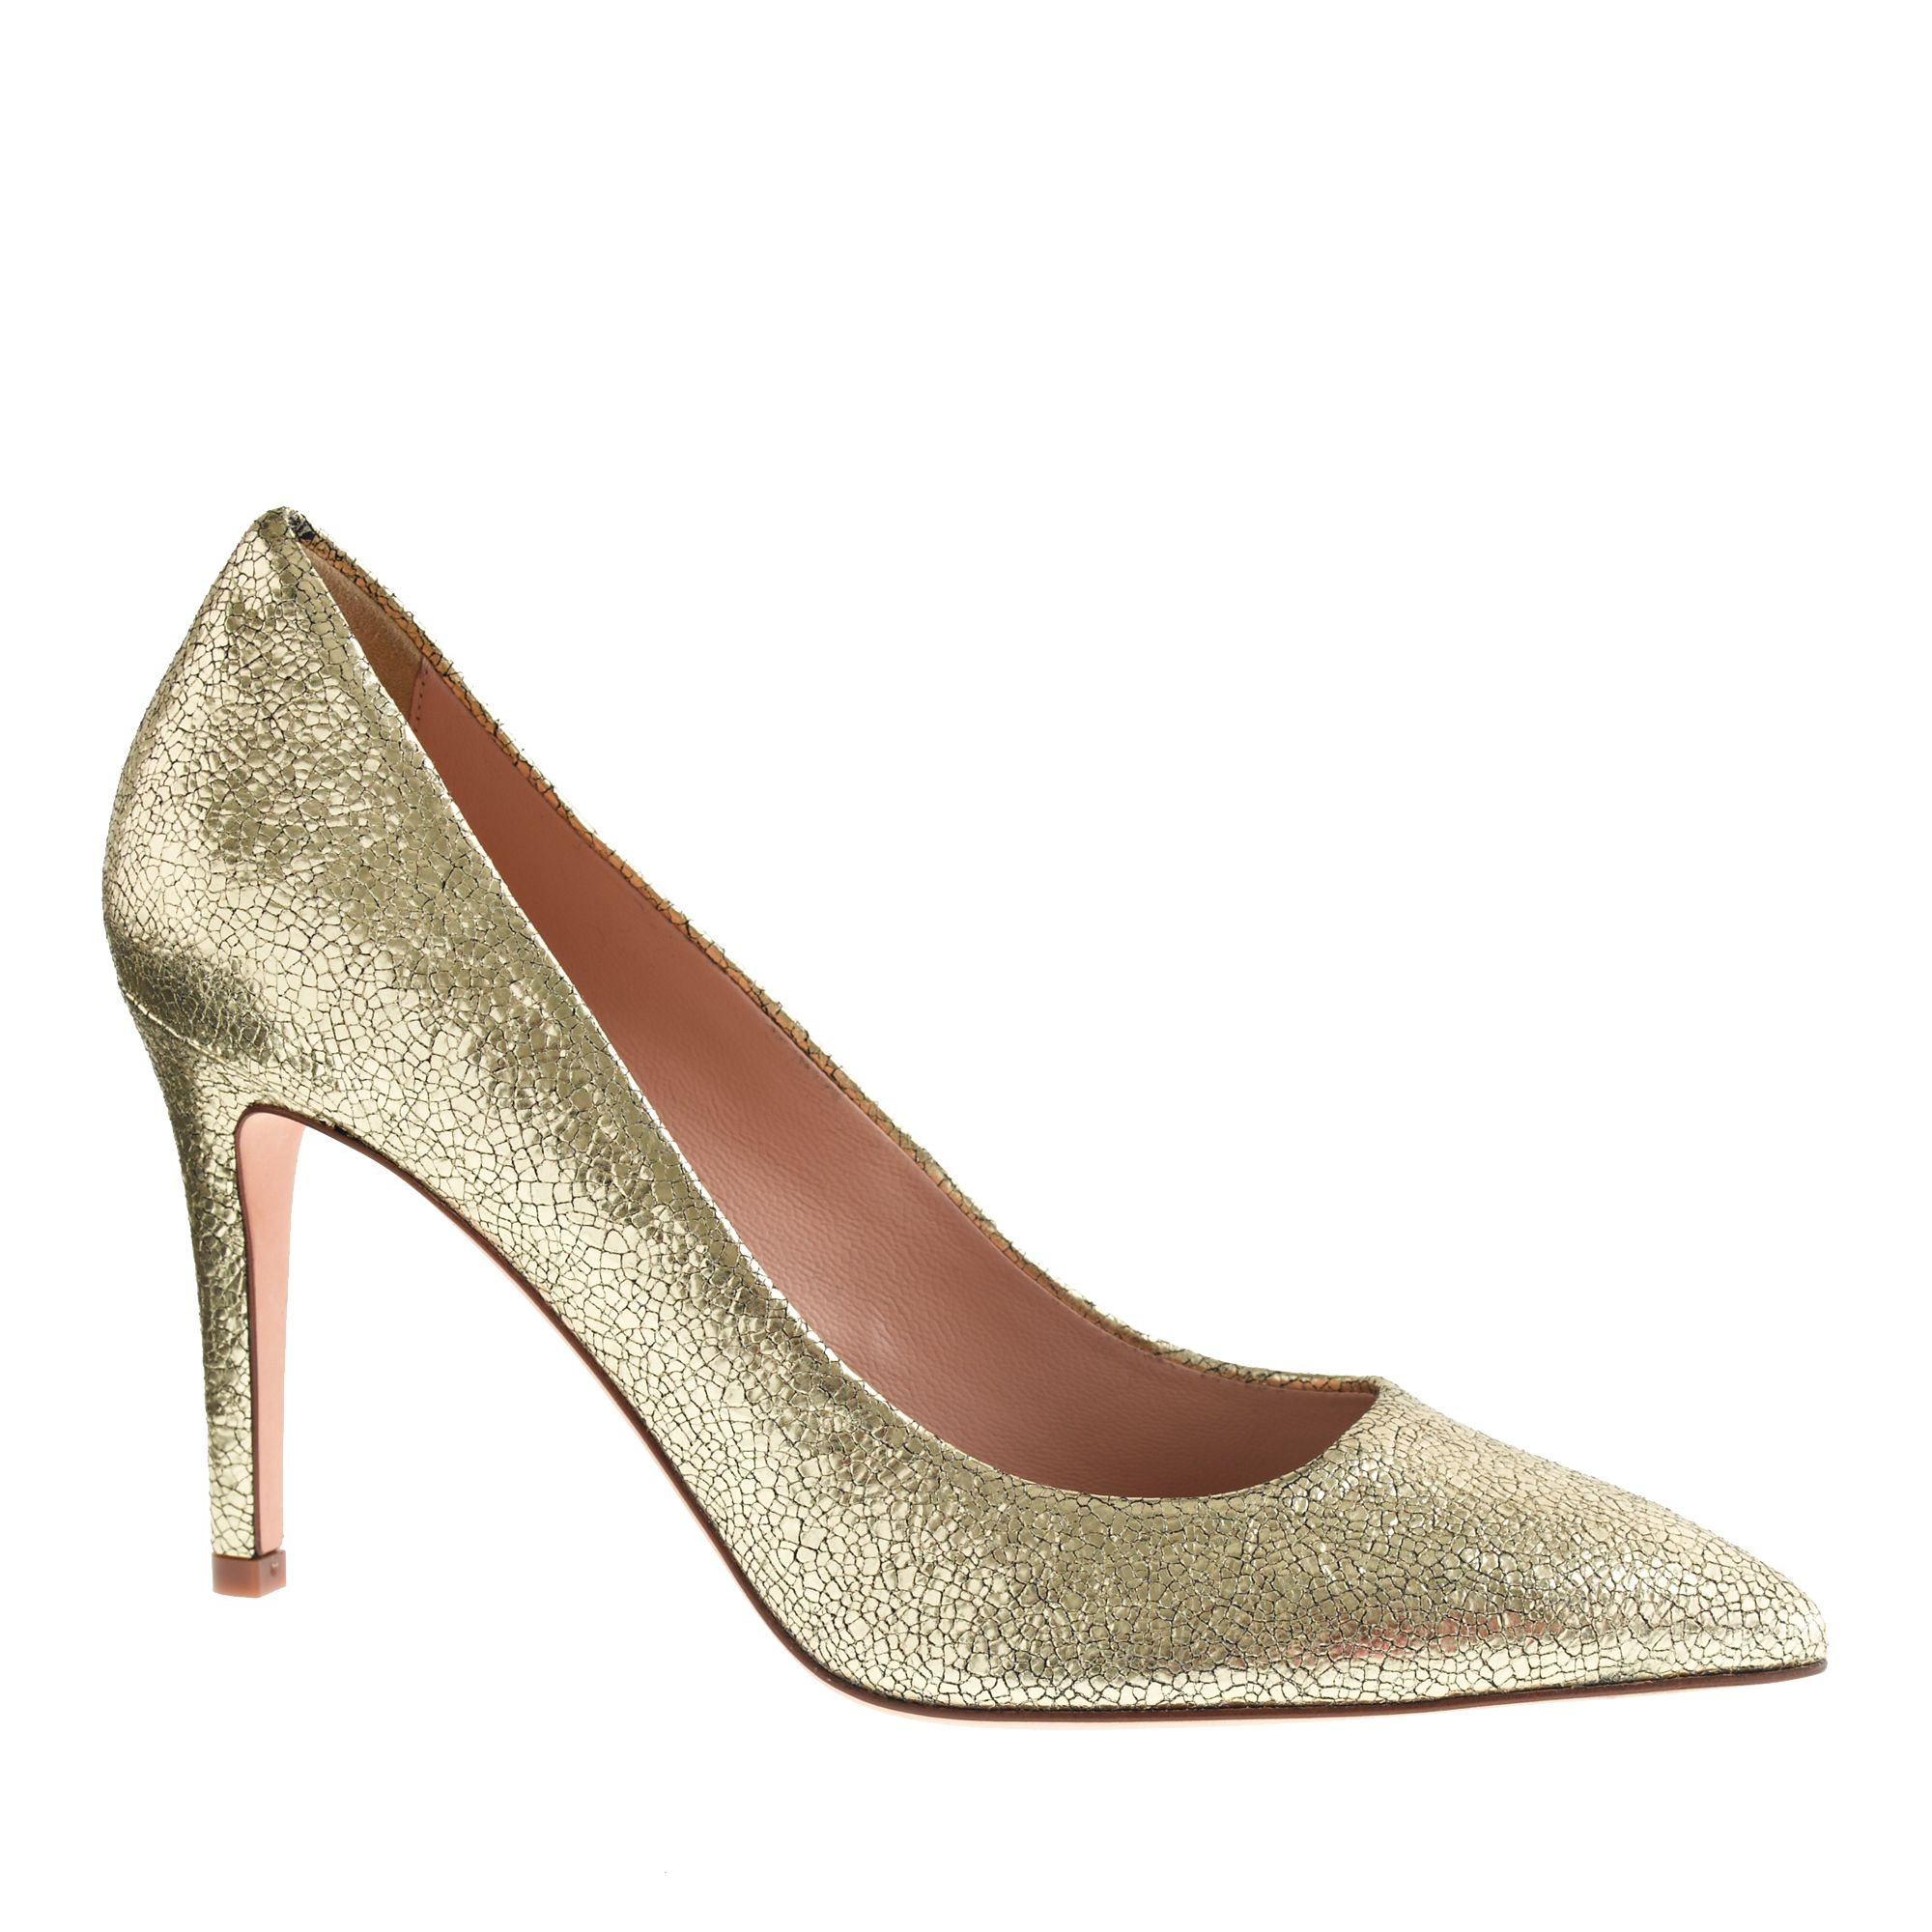 J.crew Everly Crackled Metallic Leather Pumps in Metallic | Lyst